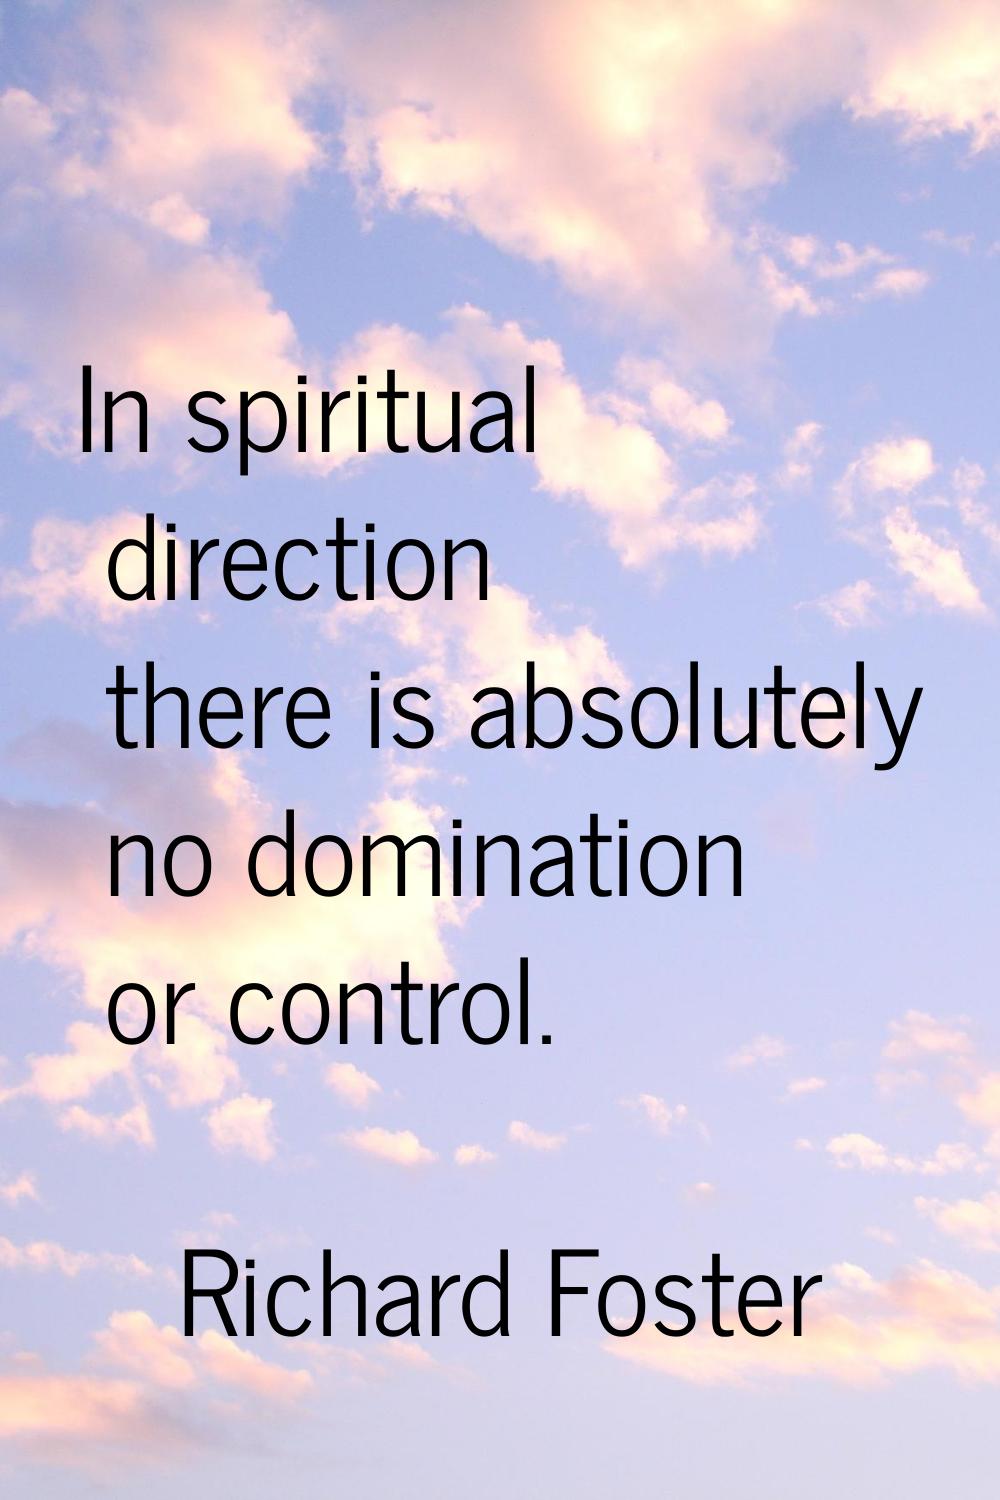 In spiritual direction there is absolutely no domination or control.